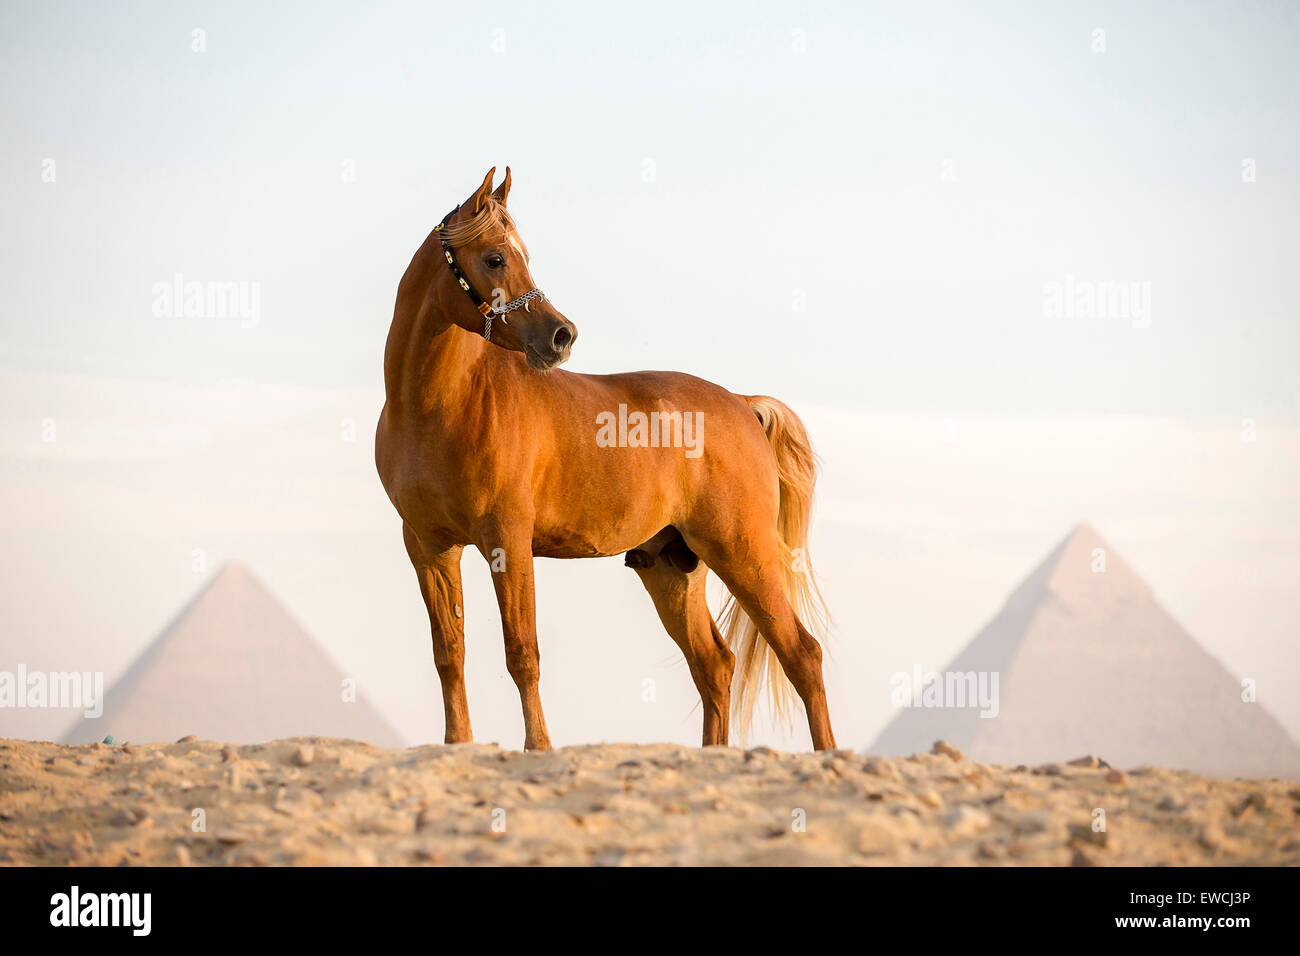 Arabian Horse. Chestnut stallion standing in front of the Pyramids of Giza in the desert. Egypt Stock Photo